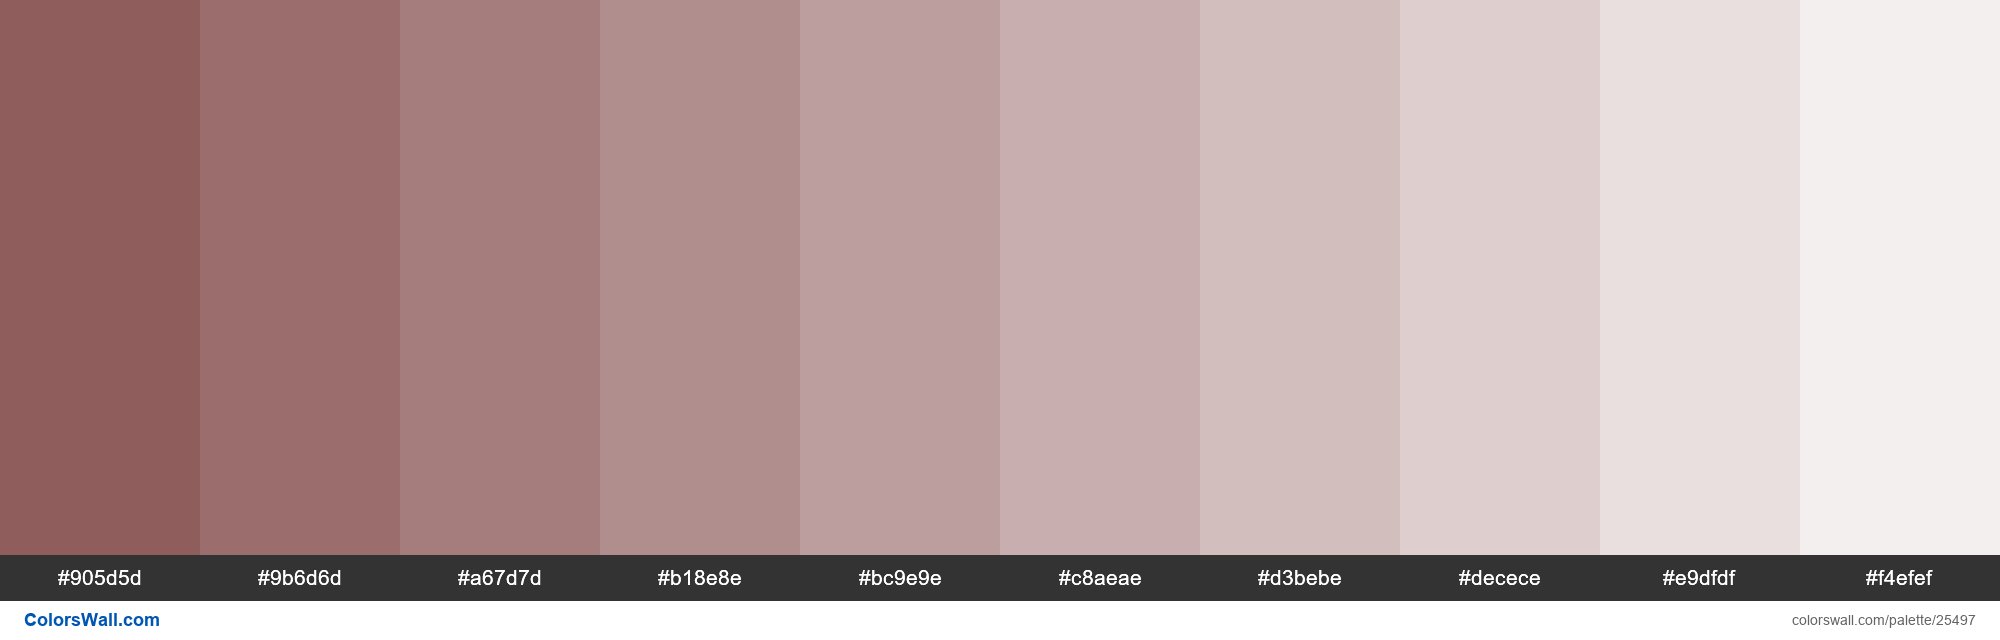 colorswall on X: Tints of Rose Taupe color #905D5D hex #905d5d